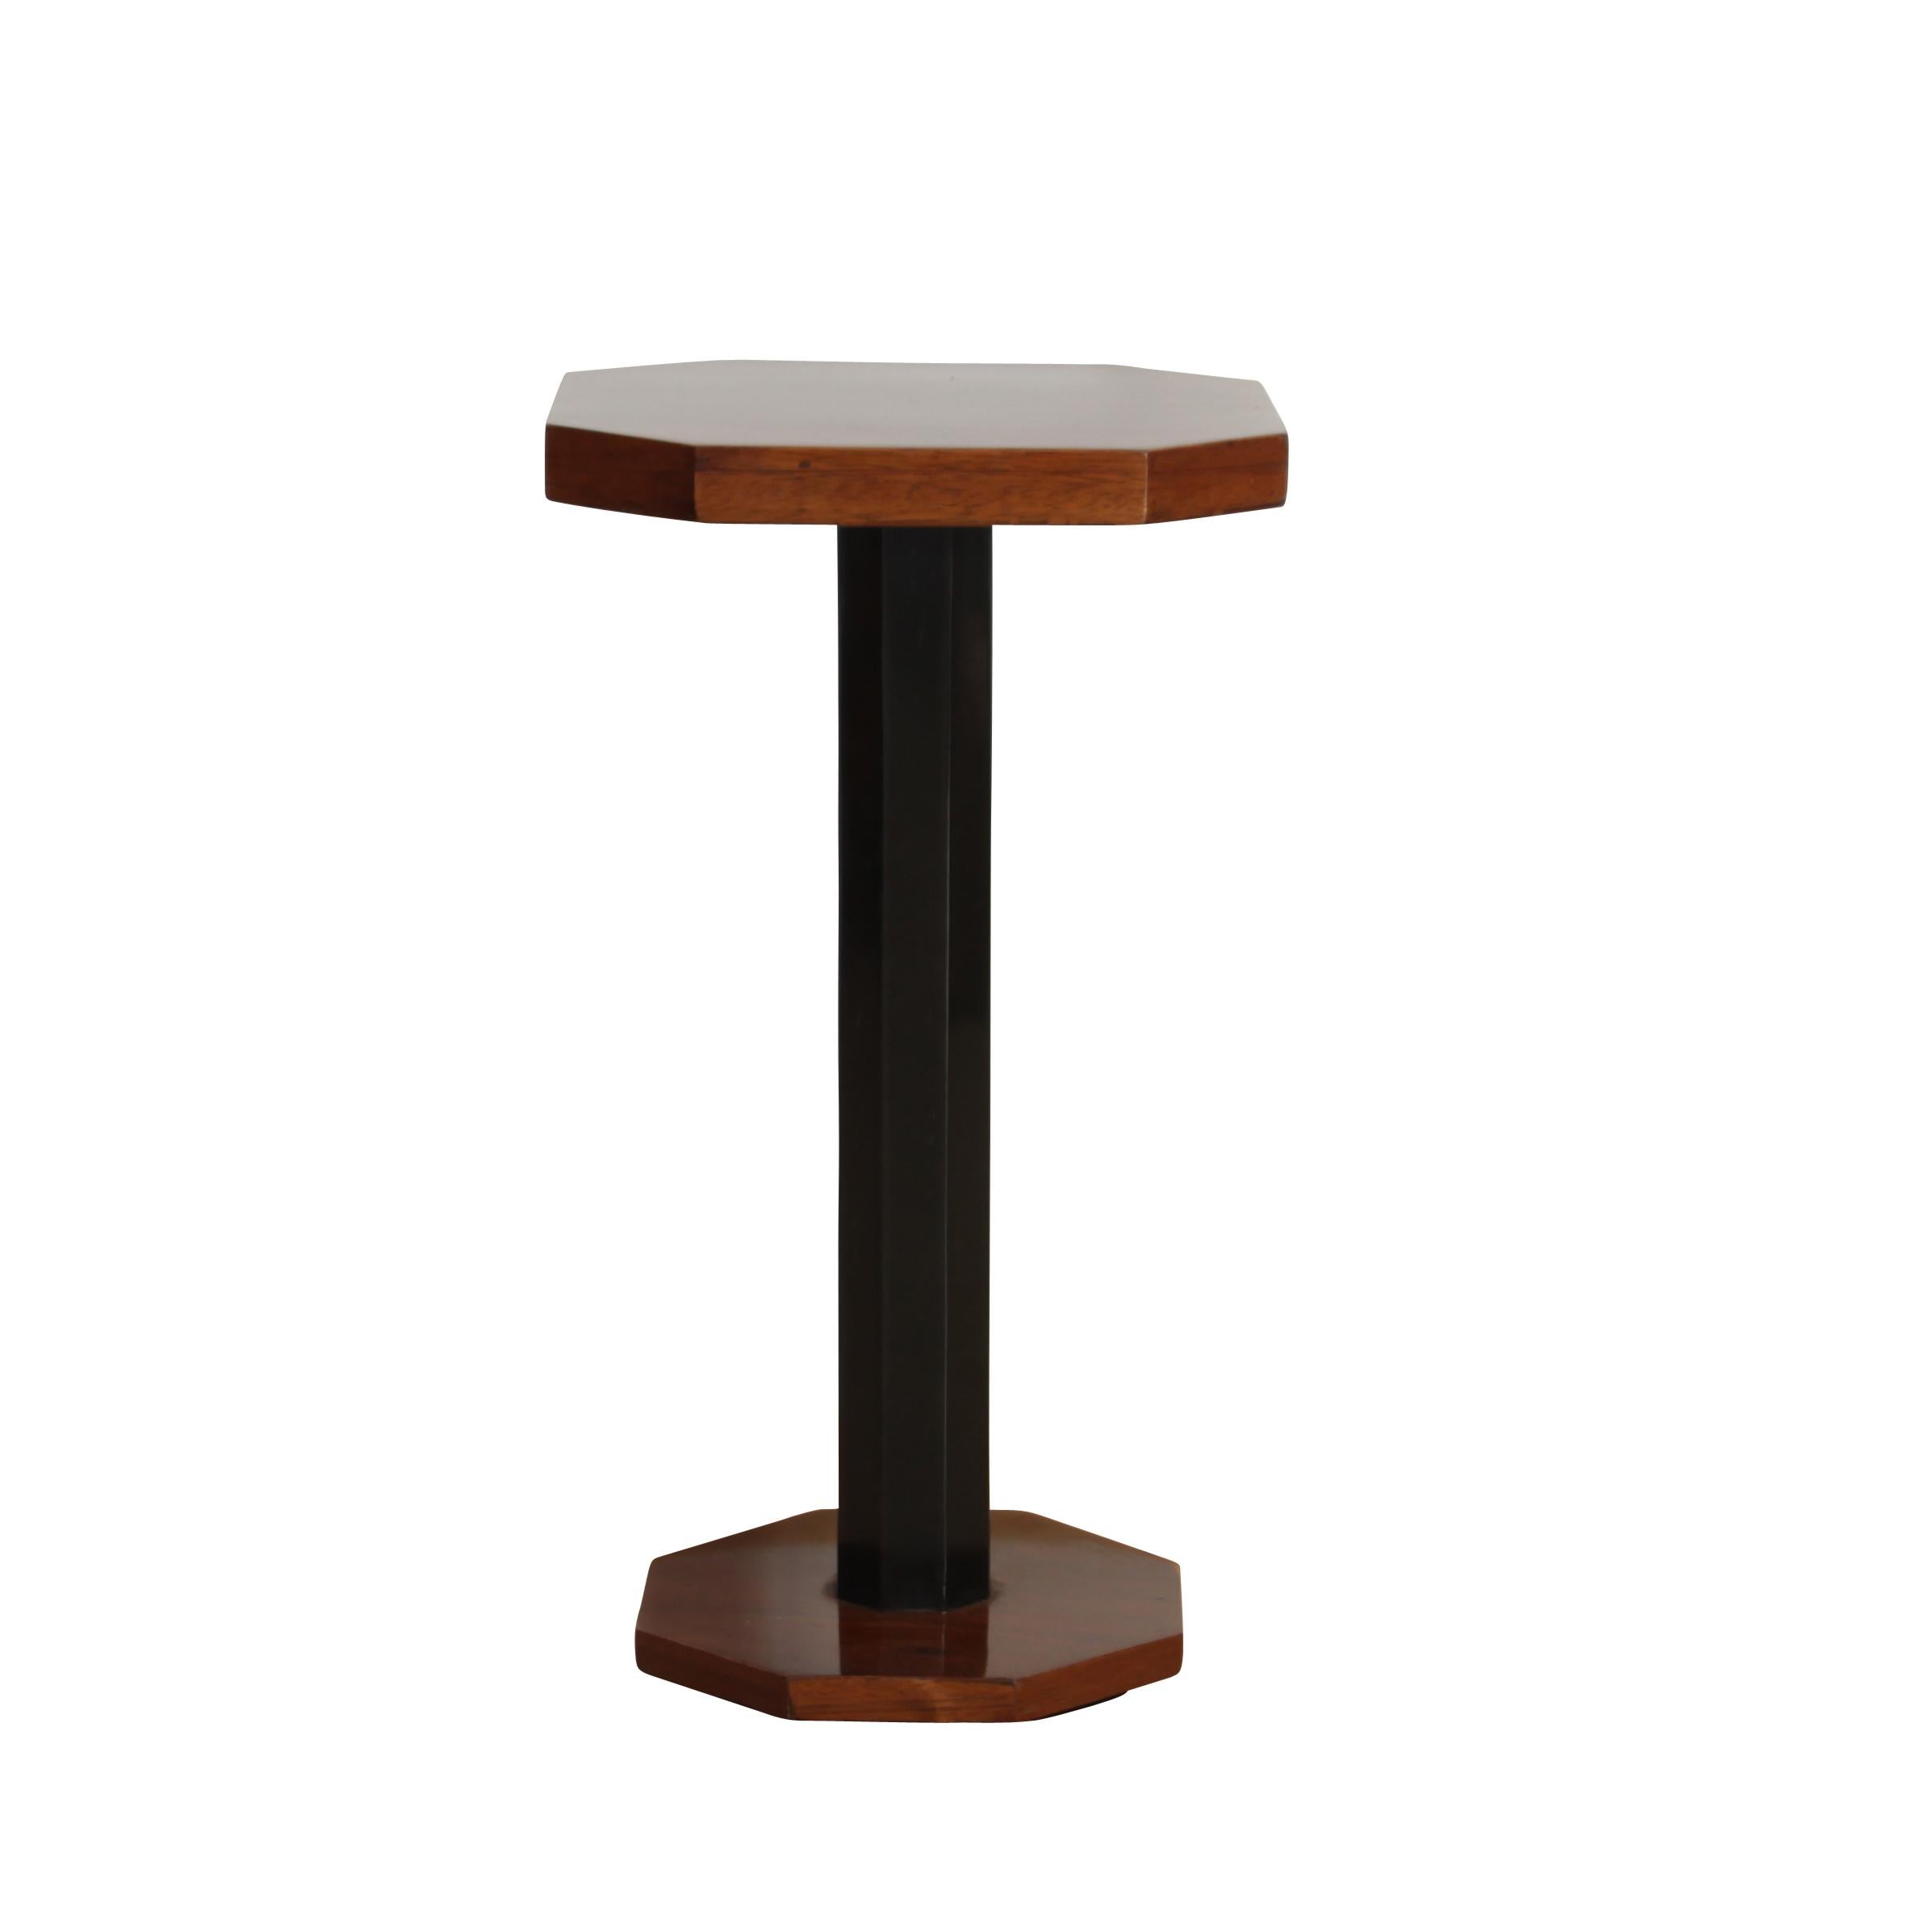 Tiny classic Art Deco table, meant to be placed next to a club chair or sofa. 
It has an octagonal shape at the top, middle and bottom. Top and bottom is walnut veneer, the middle part is ebonized and polished walnut. The table has been